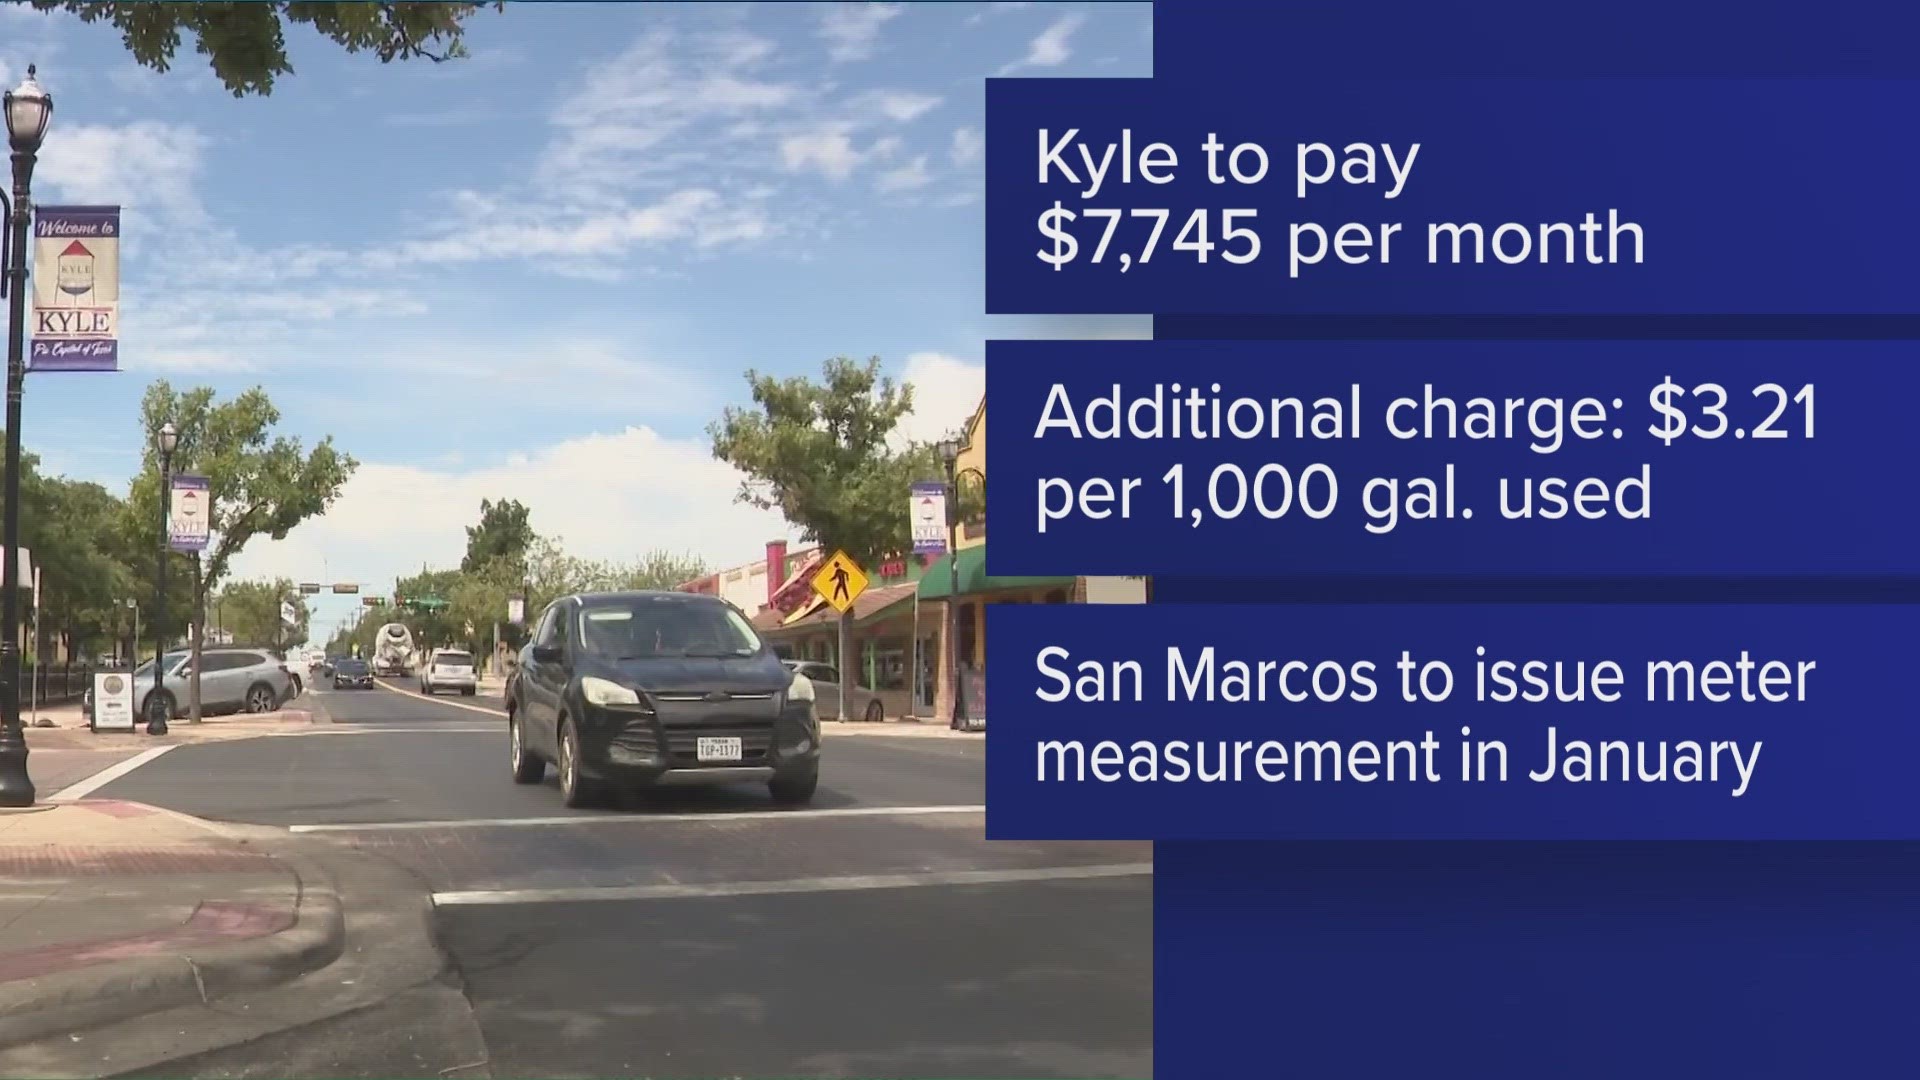 The City of Kyle agreed to the terms required to buy water from the City of San Marcos.